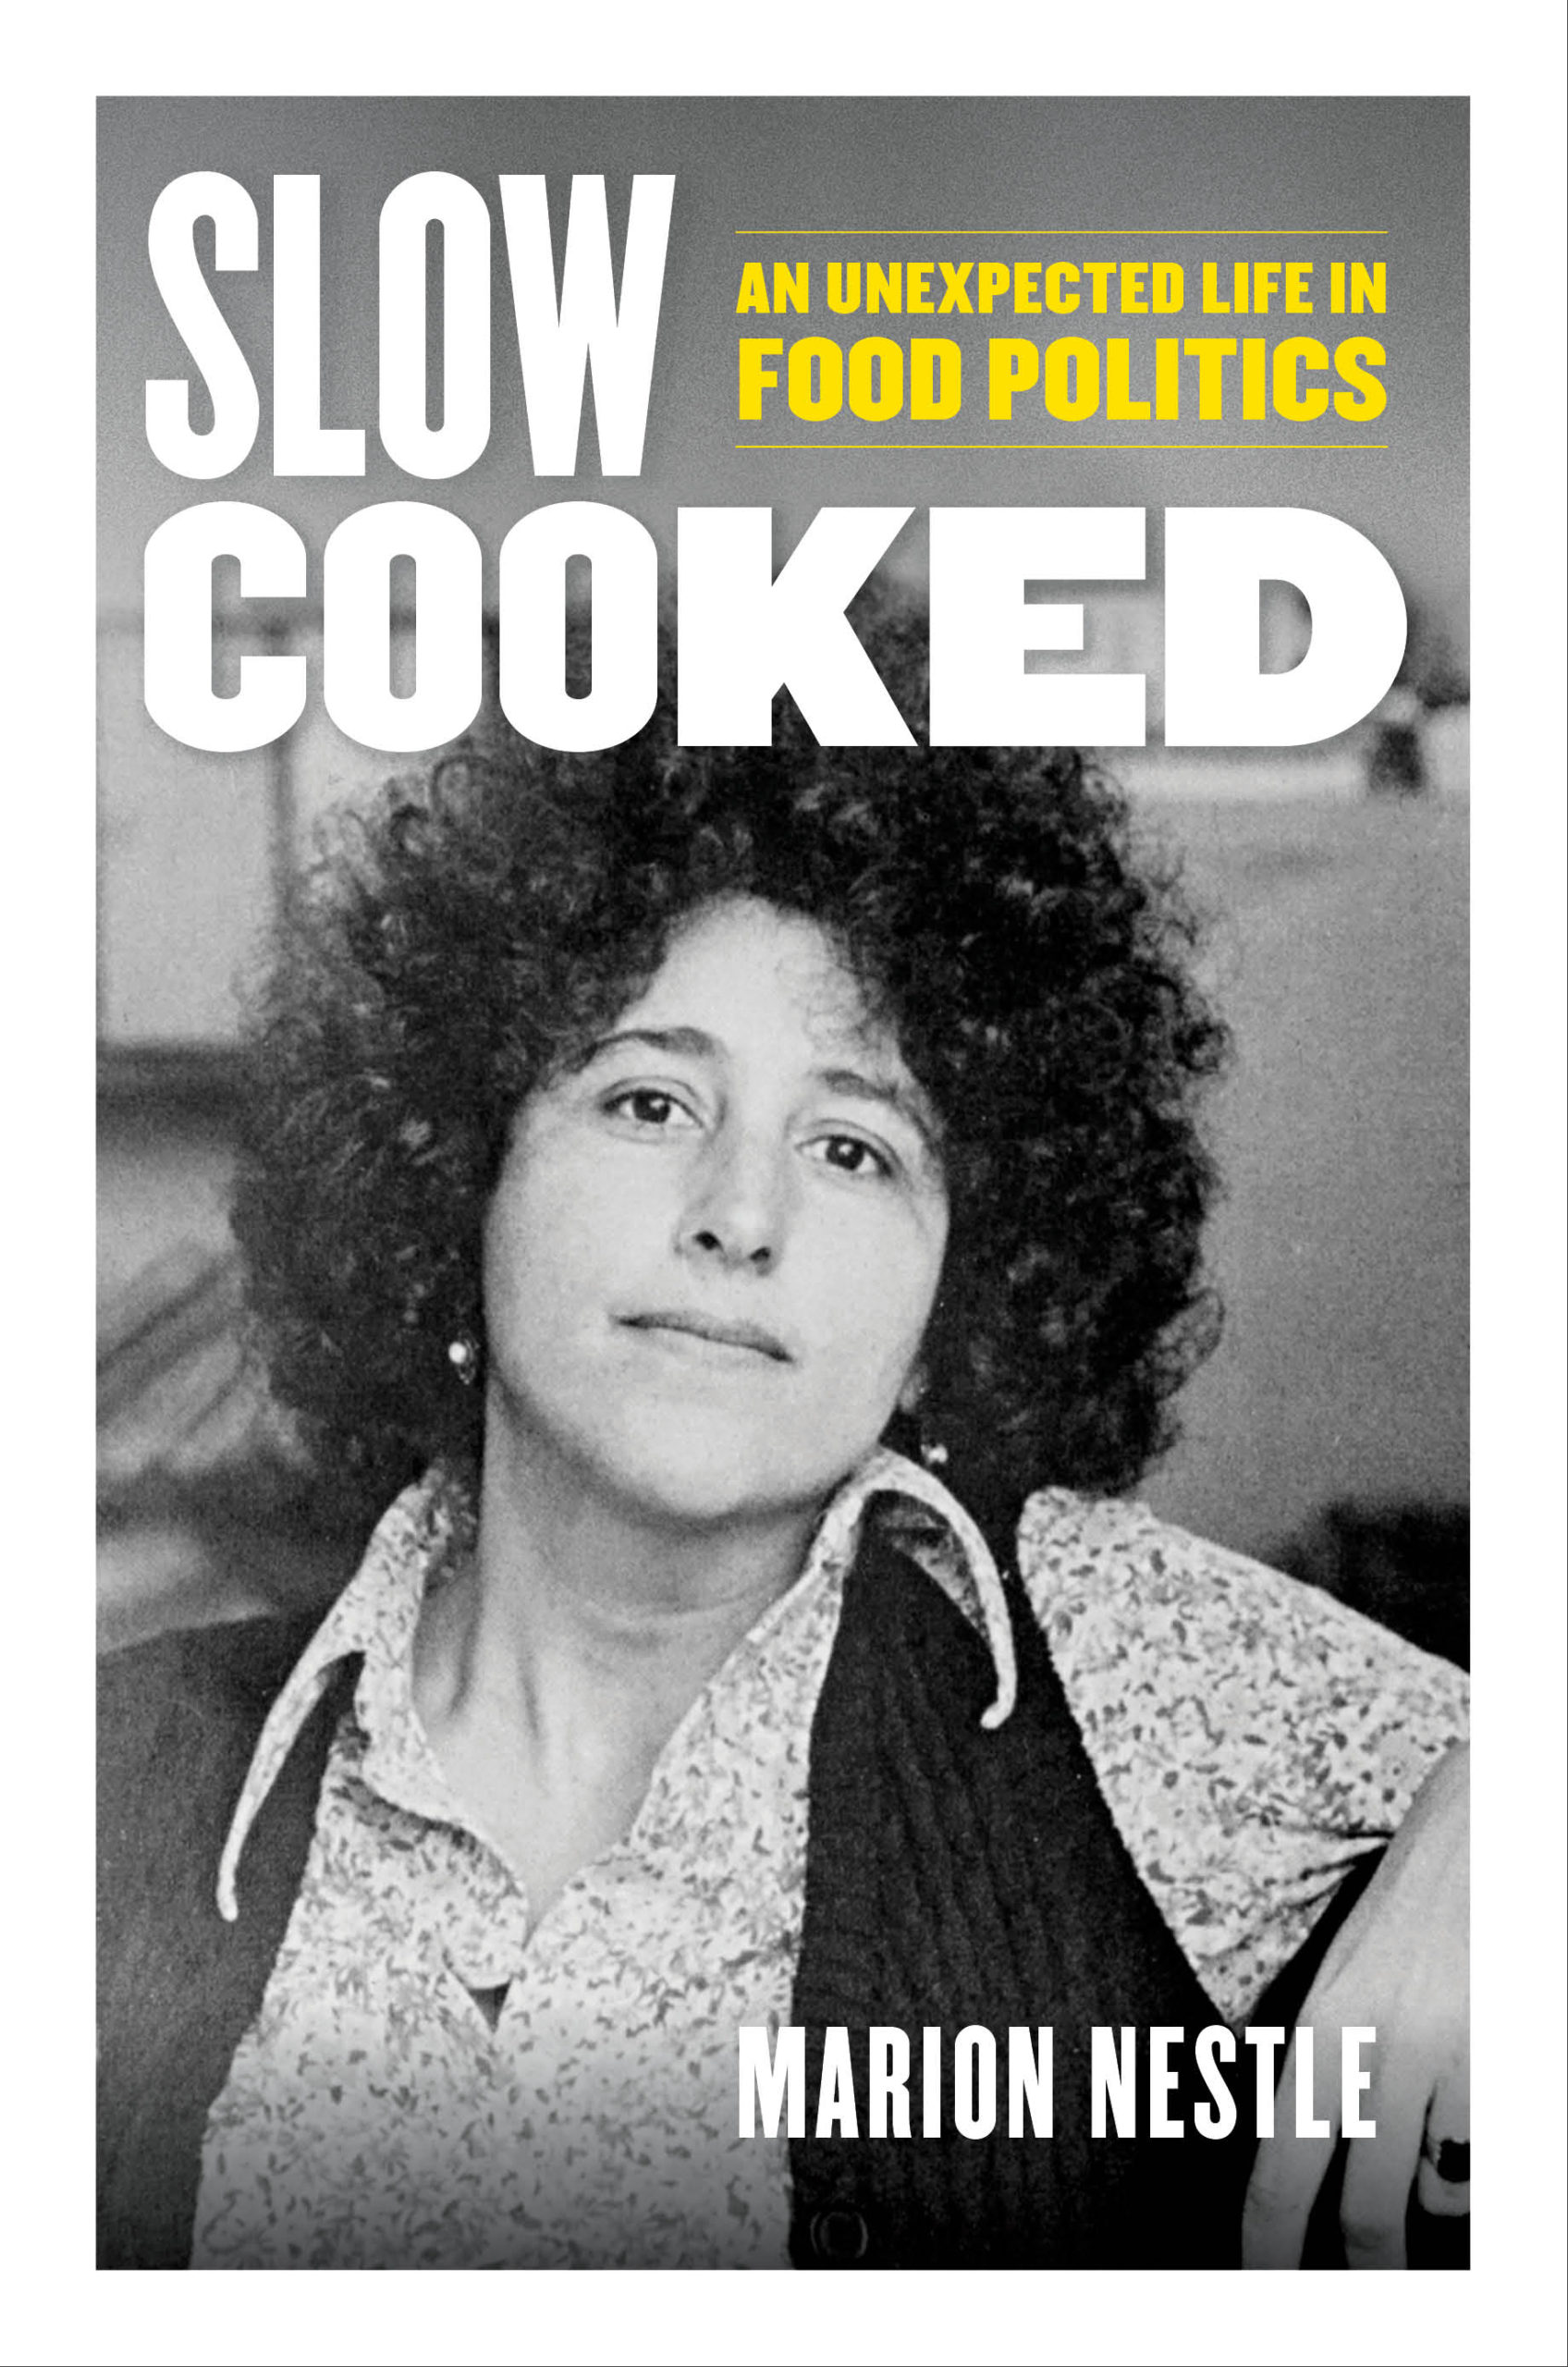 My forthcoming memoir is online: Slow-Cooked!